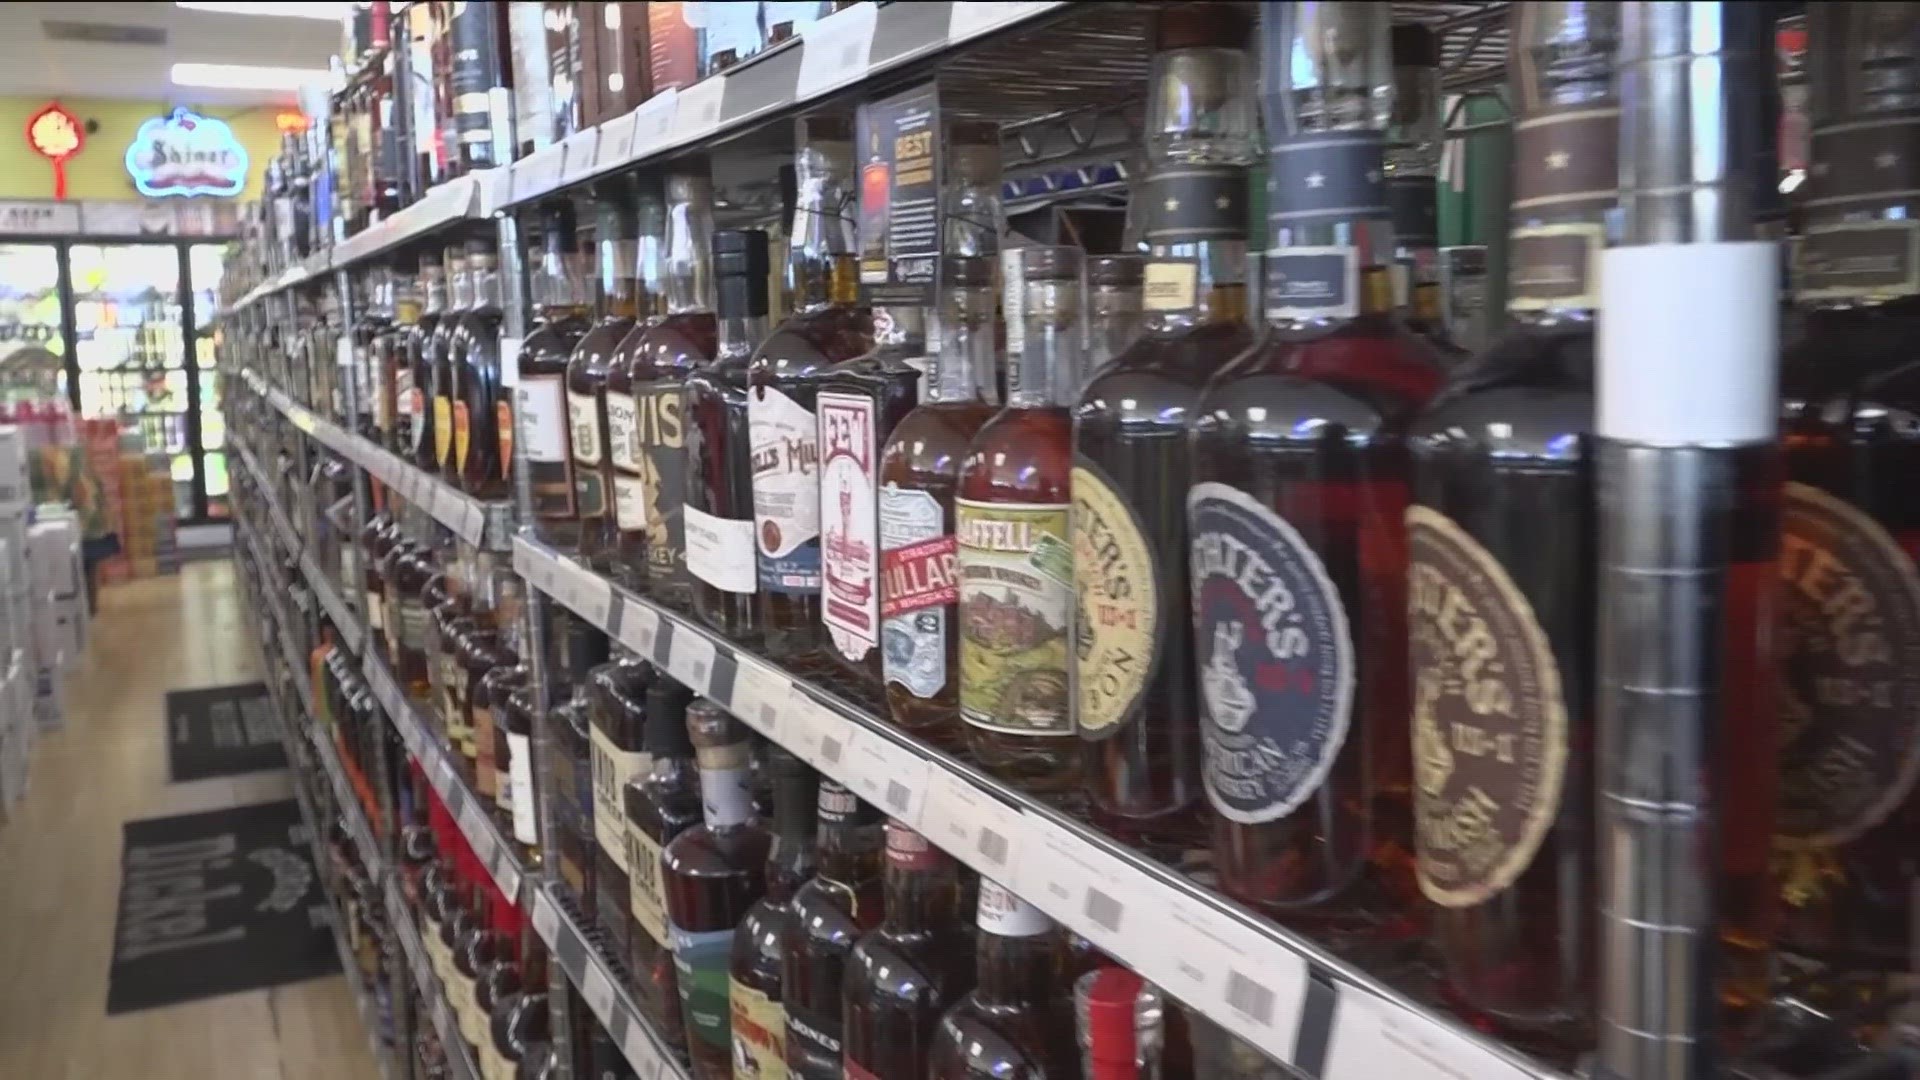 Given that New Year's Eve falls on a Sunday, liquor stores were busy on Saturday to accomadate.